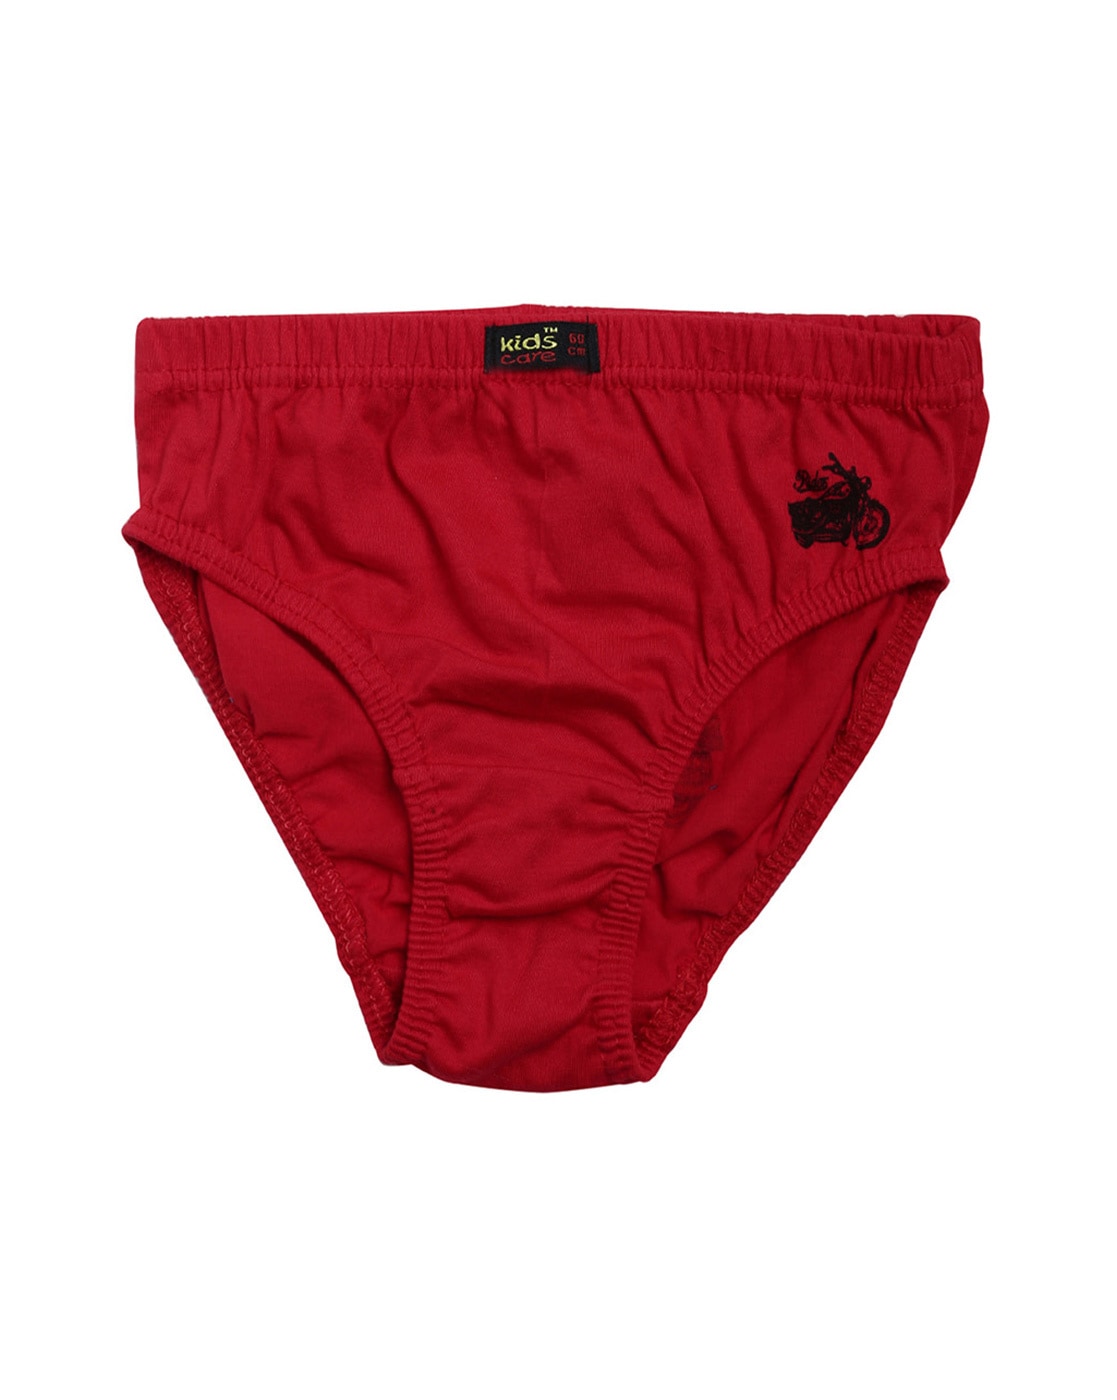 Buy Assorted Innerwear Sets for Boys by Dollar Online